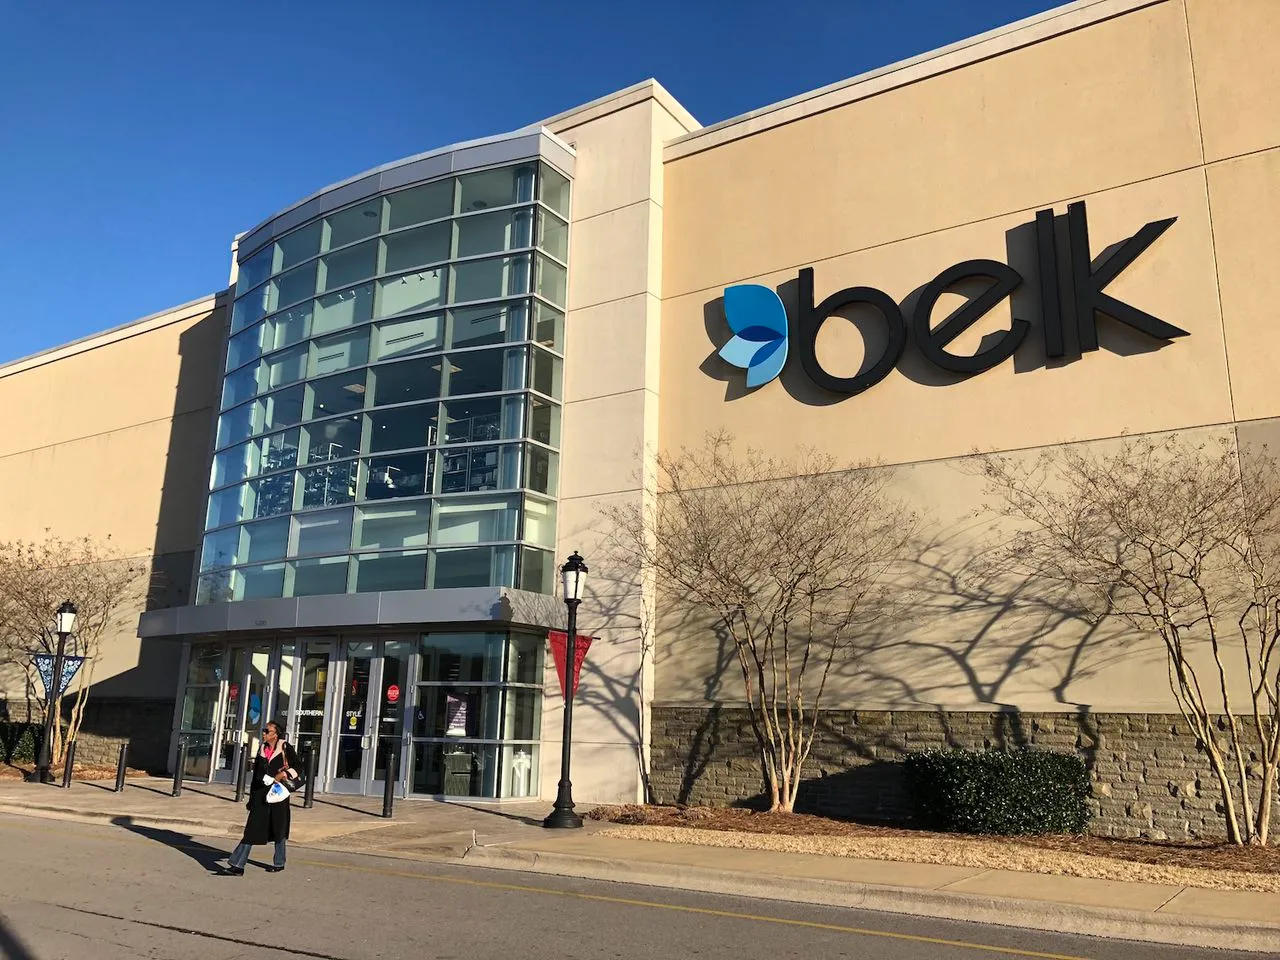 How to Find Belk Store Hours